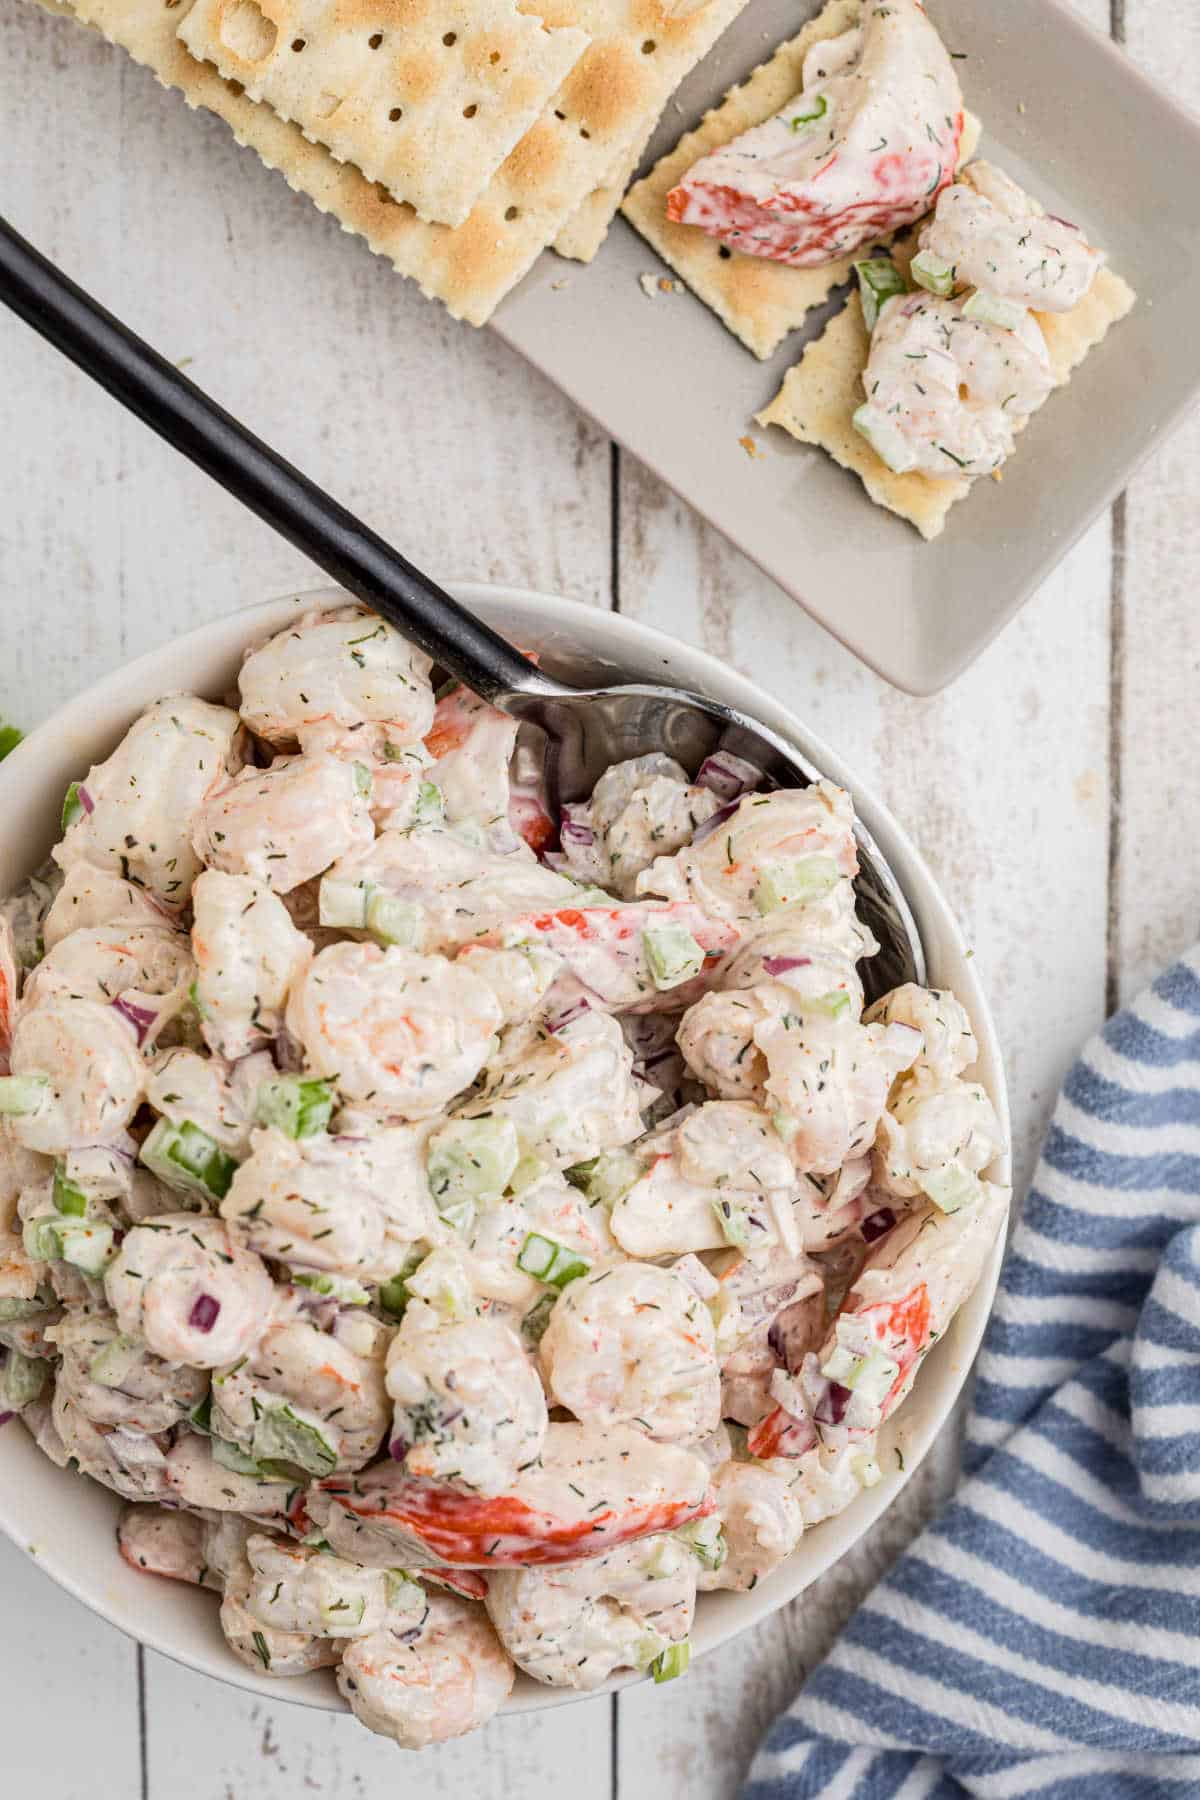 A bowl of seafood salad with a spoon and some crackers.